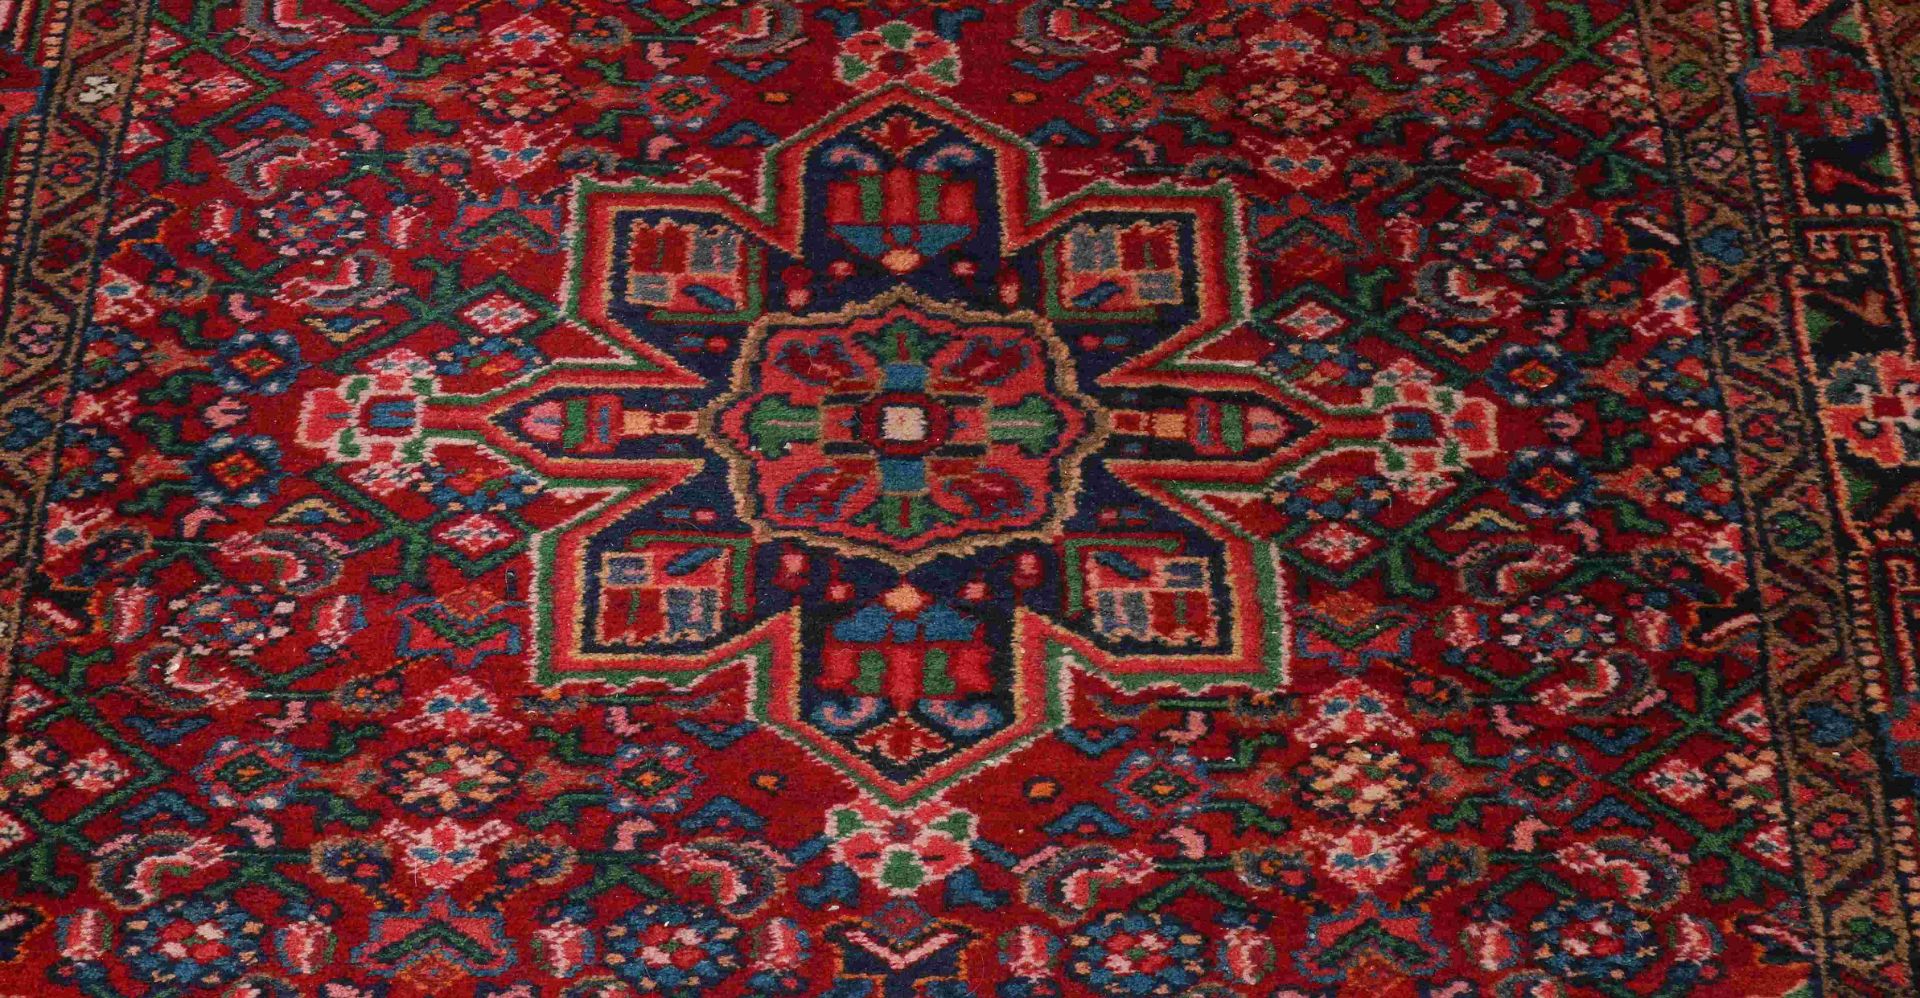 Old Persian rug, 156 x 110 cm. - Image 2 of 3